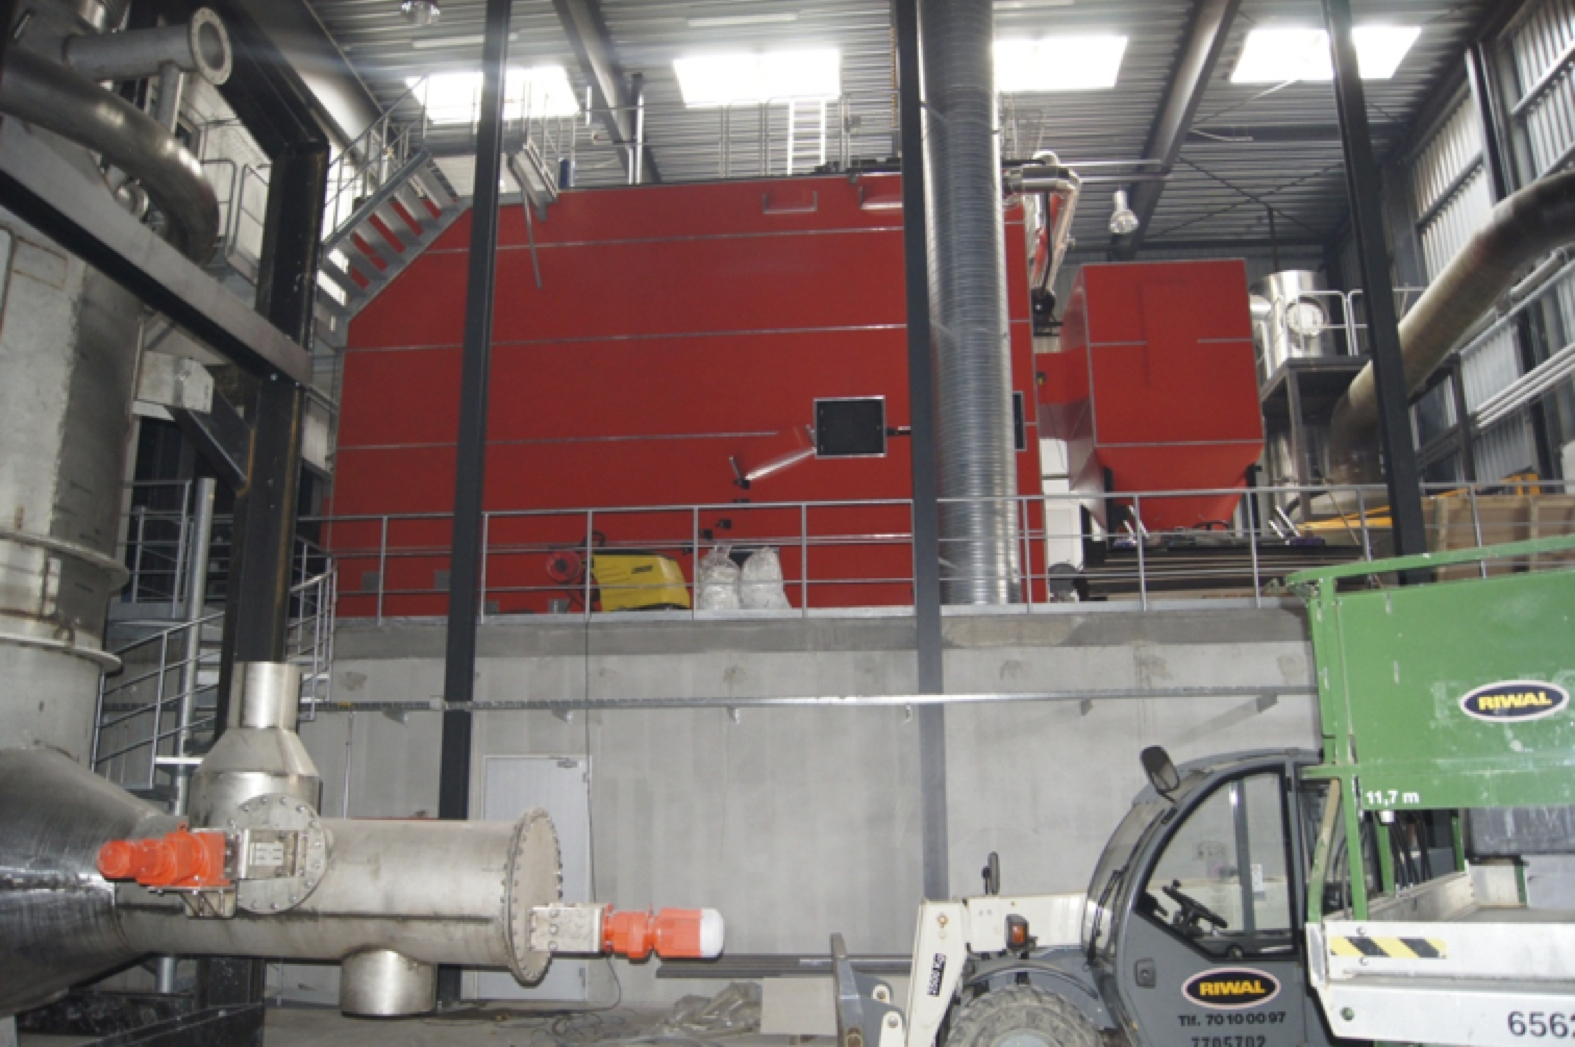 Picture 2 - Large-scale  biomass boiler